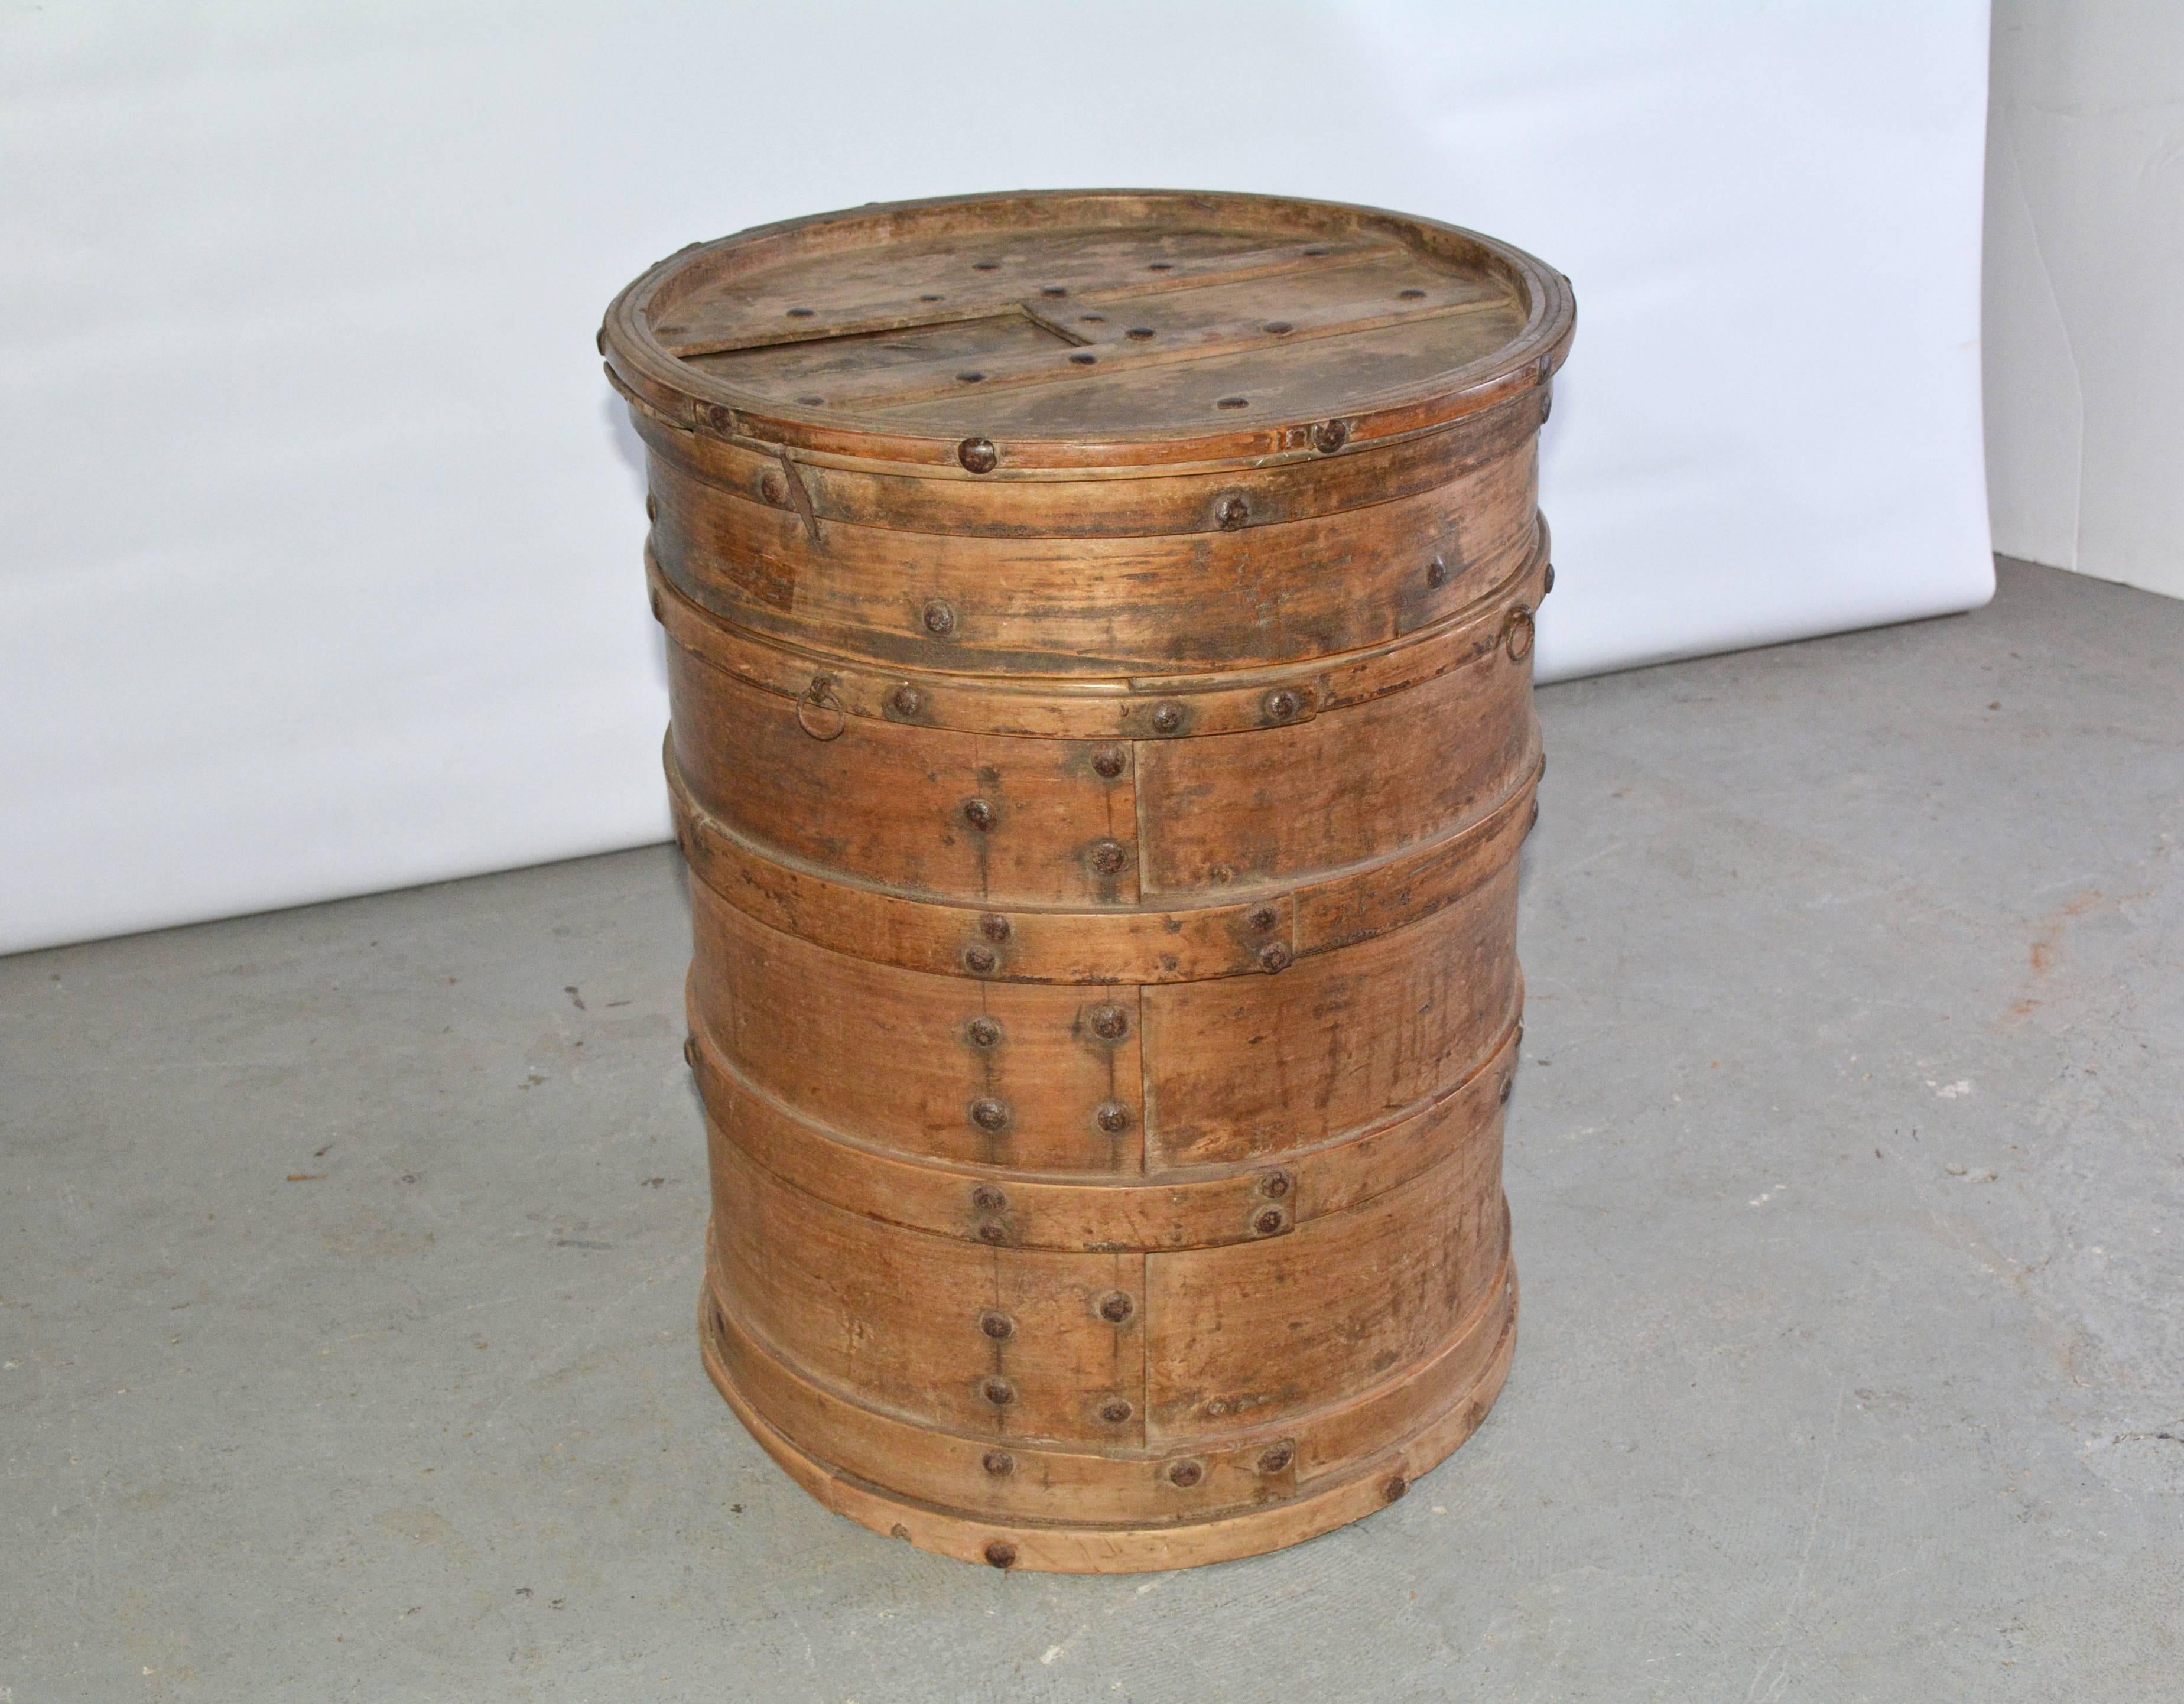 The antique round Asian storage container is composed of strips of bentwood that have been pinned together. The matching lid with a bottom of its own has a sliding panel that reveals a hole. Can be used as side table or table base.